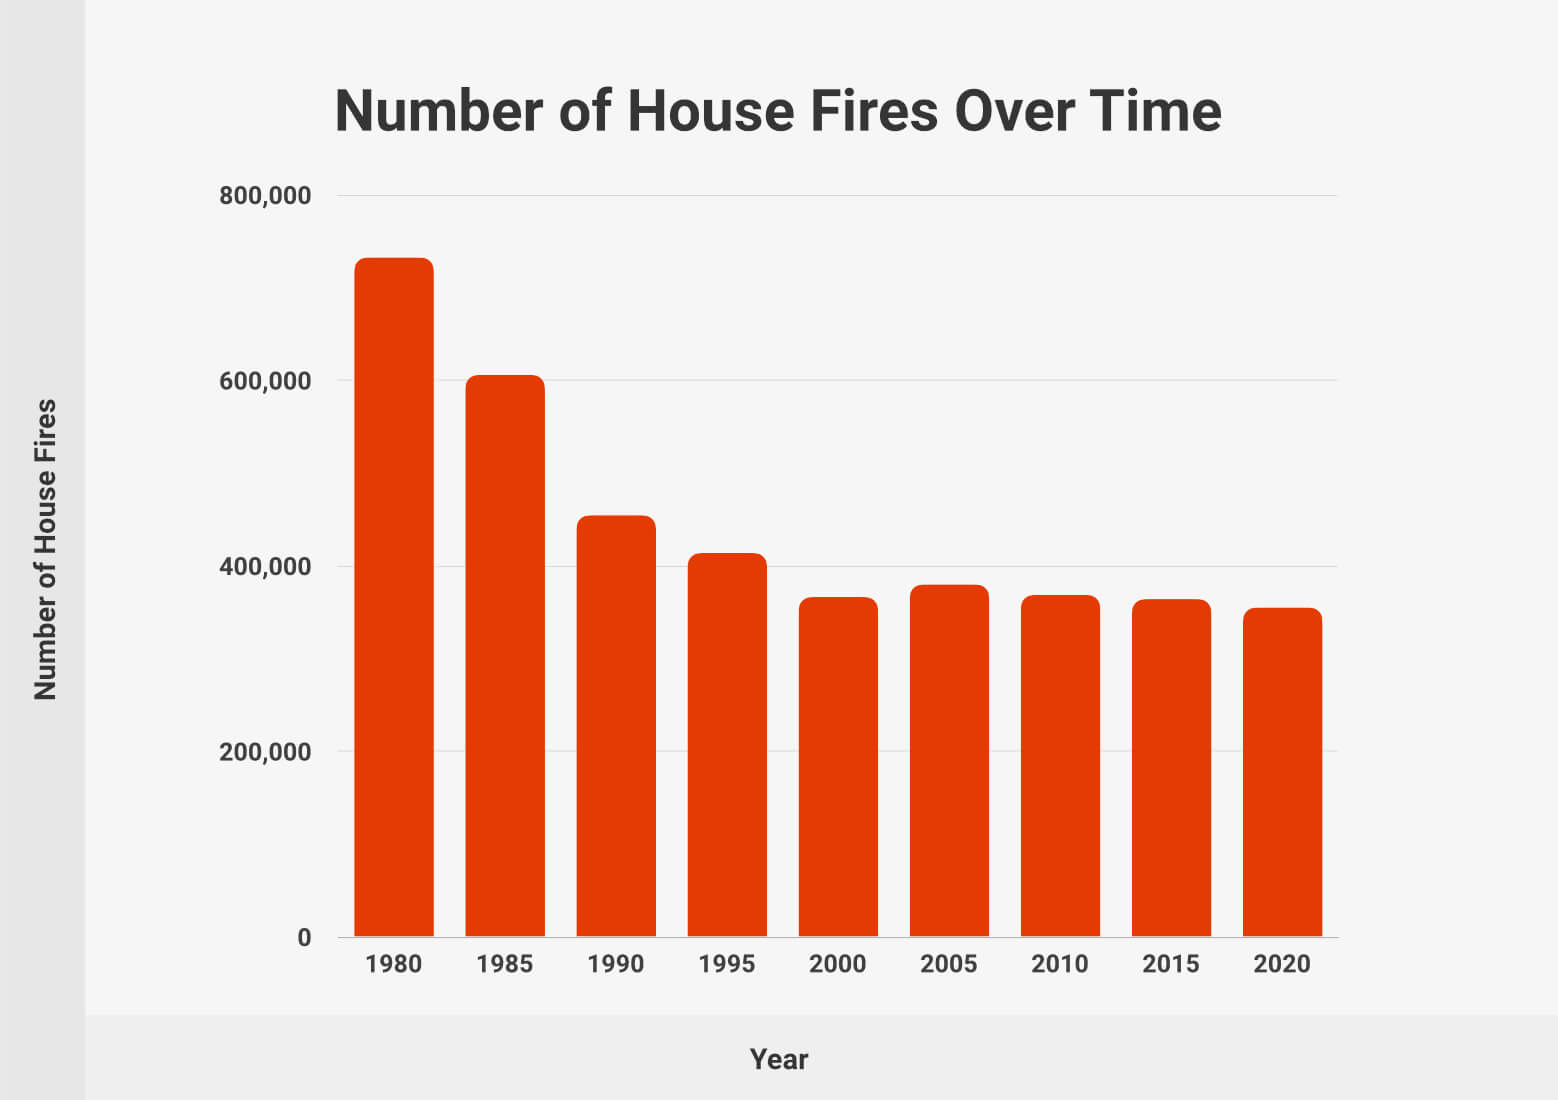 Number of House Fires Over Time